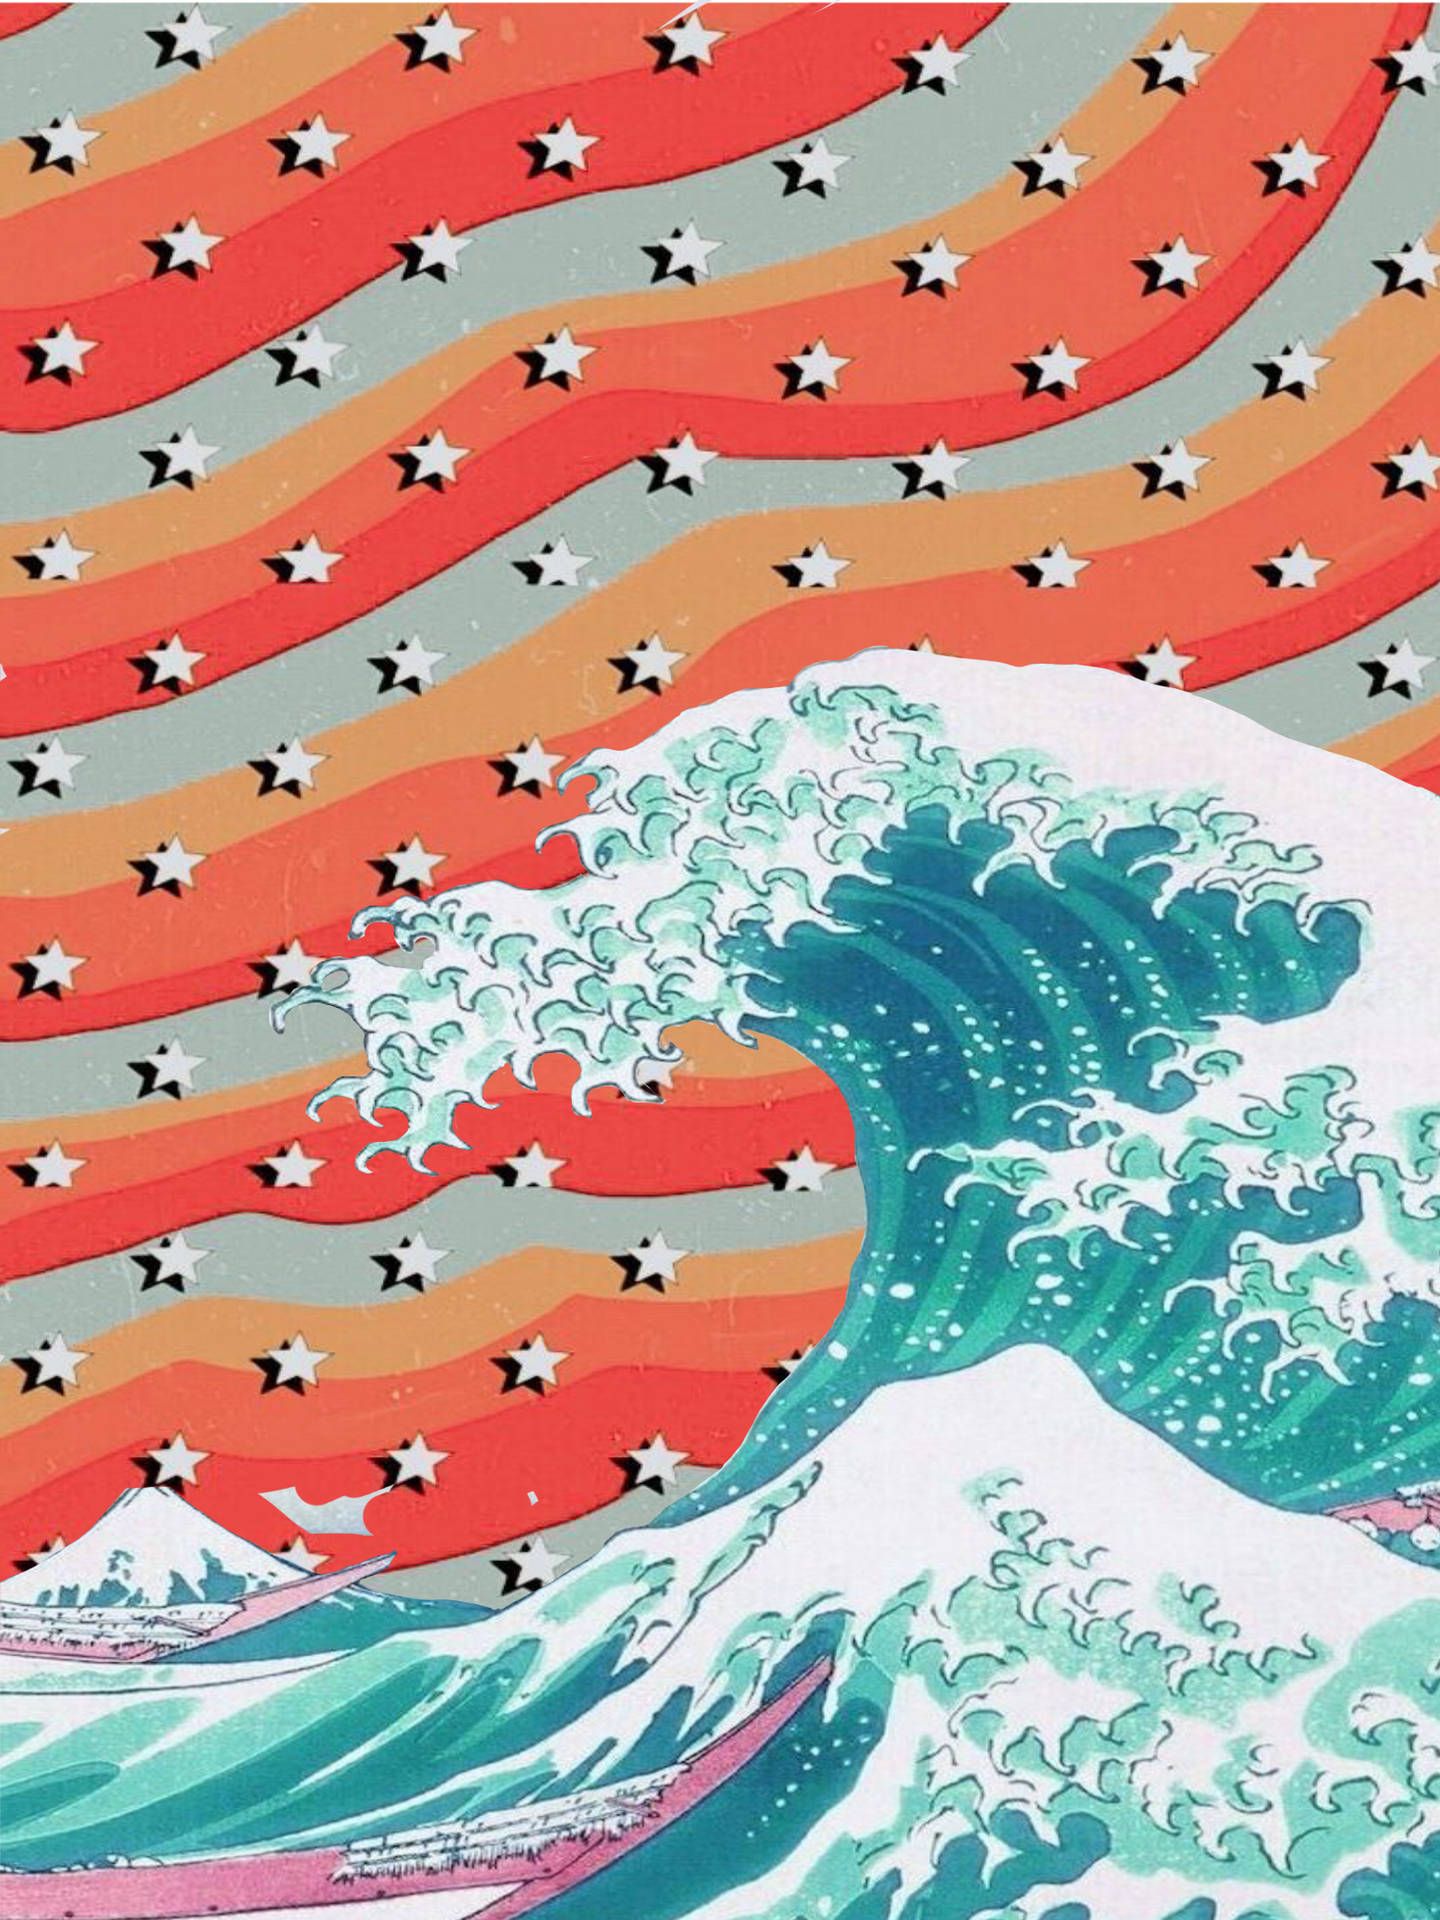 The great wave off kanagawa by person - Wave